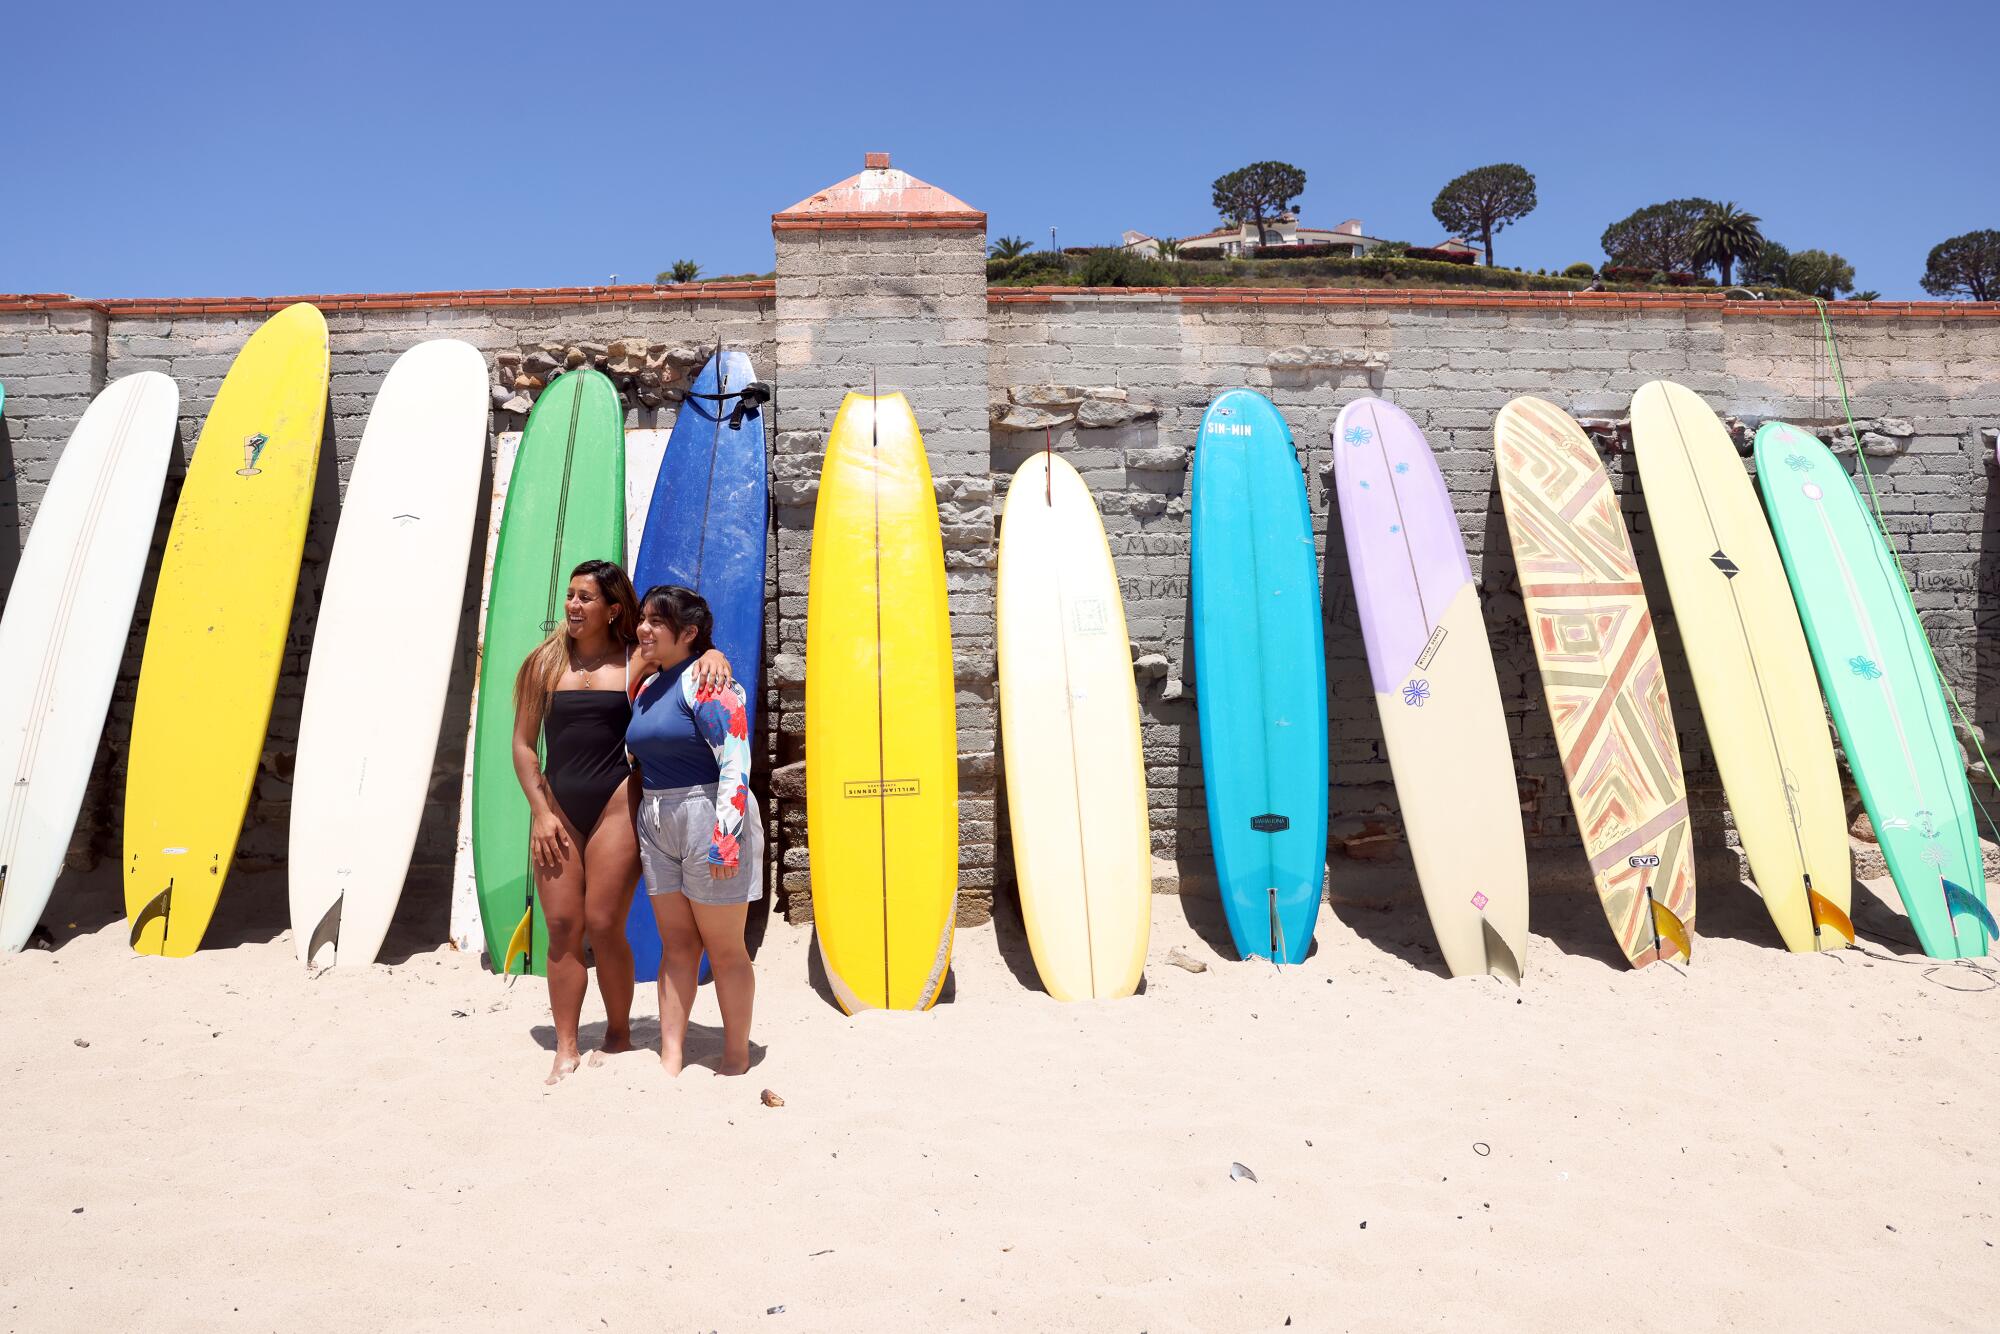 Giselle Carrillo poses for a photo with Genesis Mendoza in front of a row of longboards at First Point in Malibu.